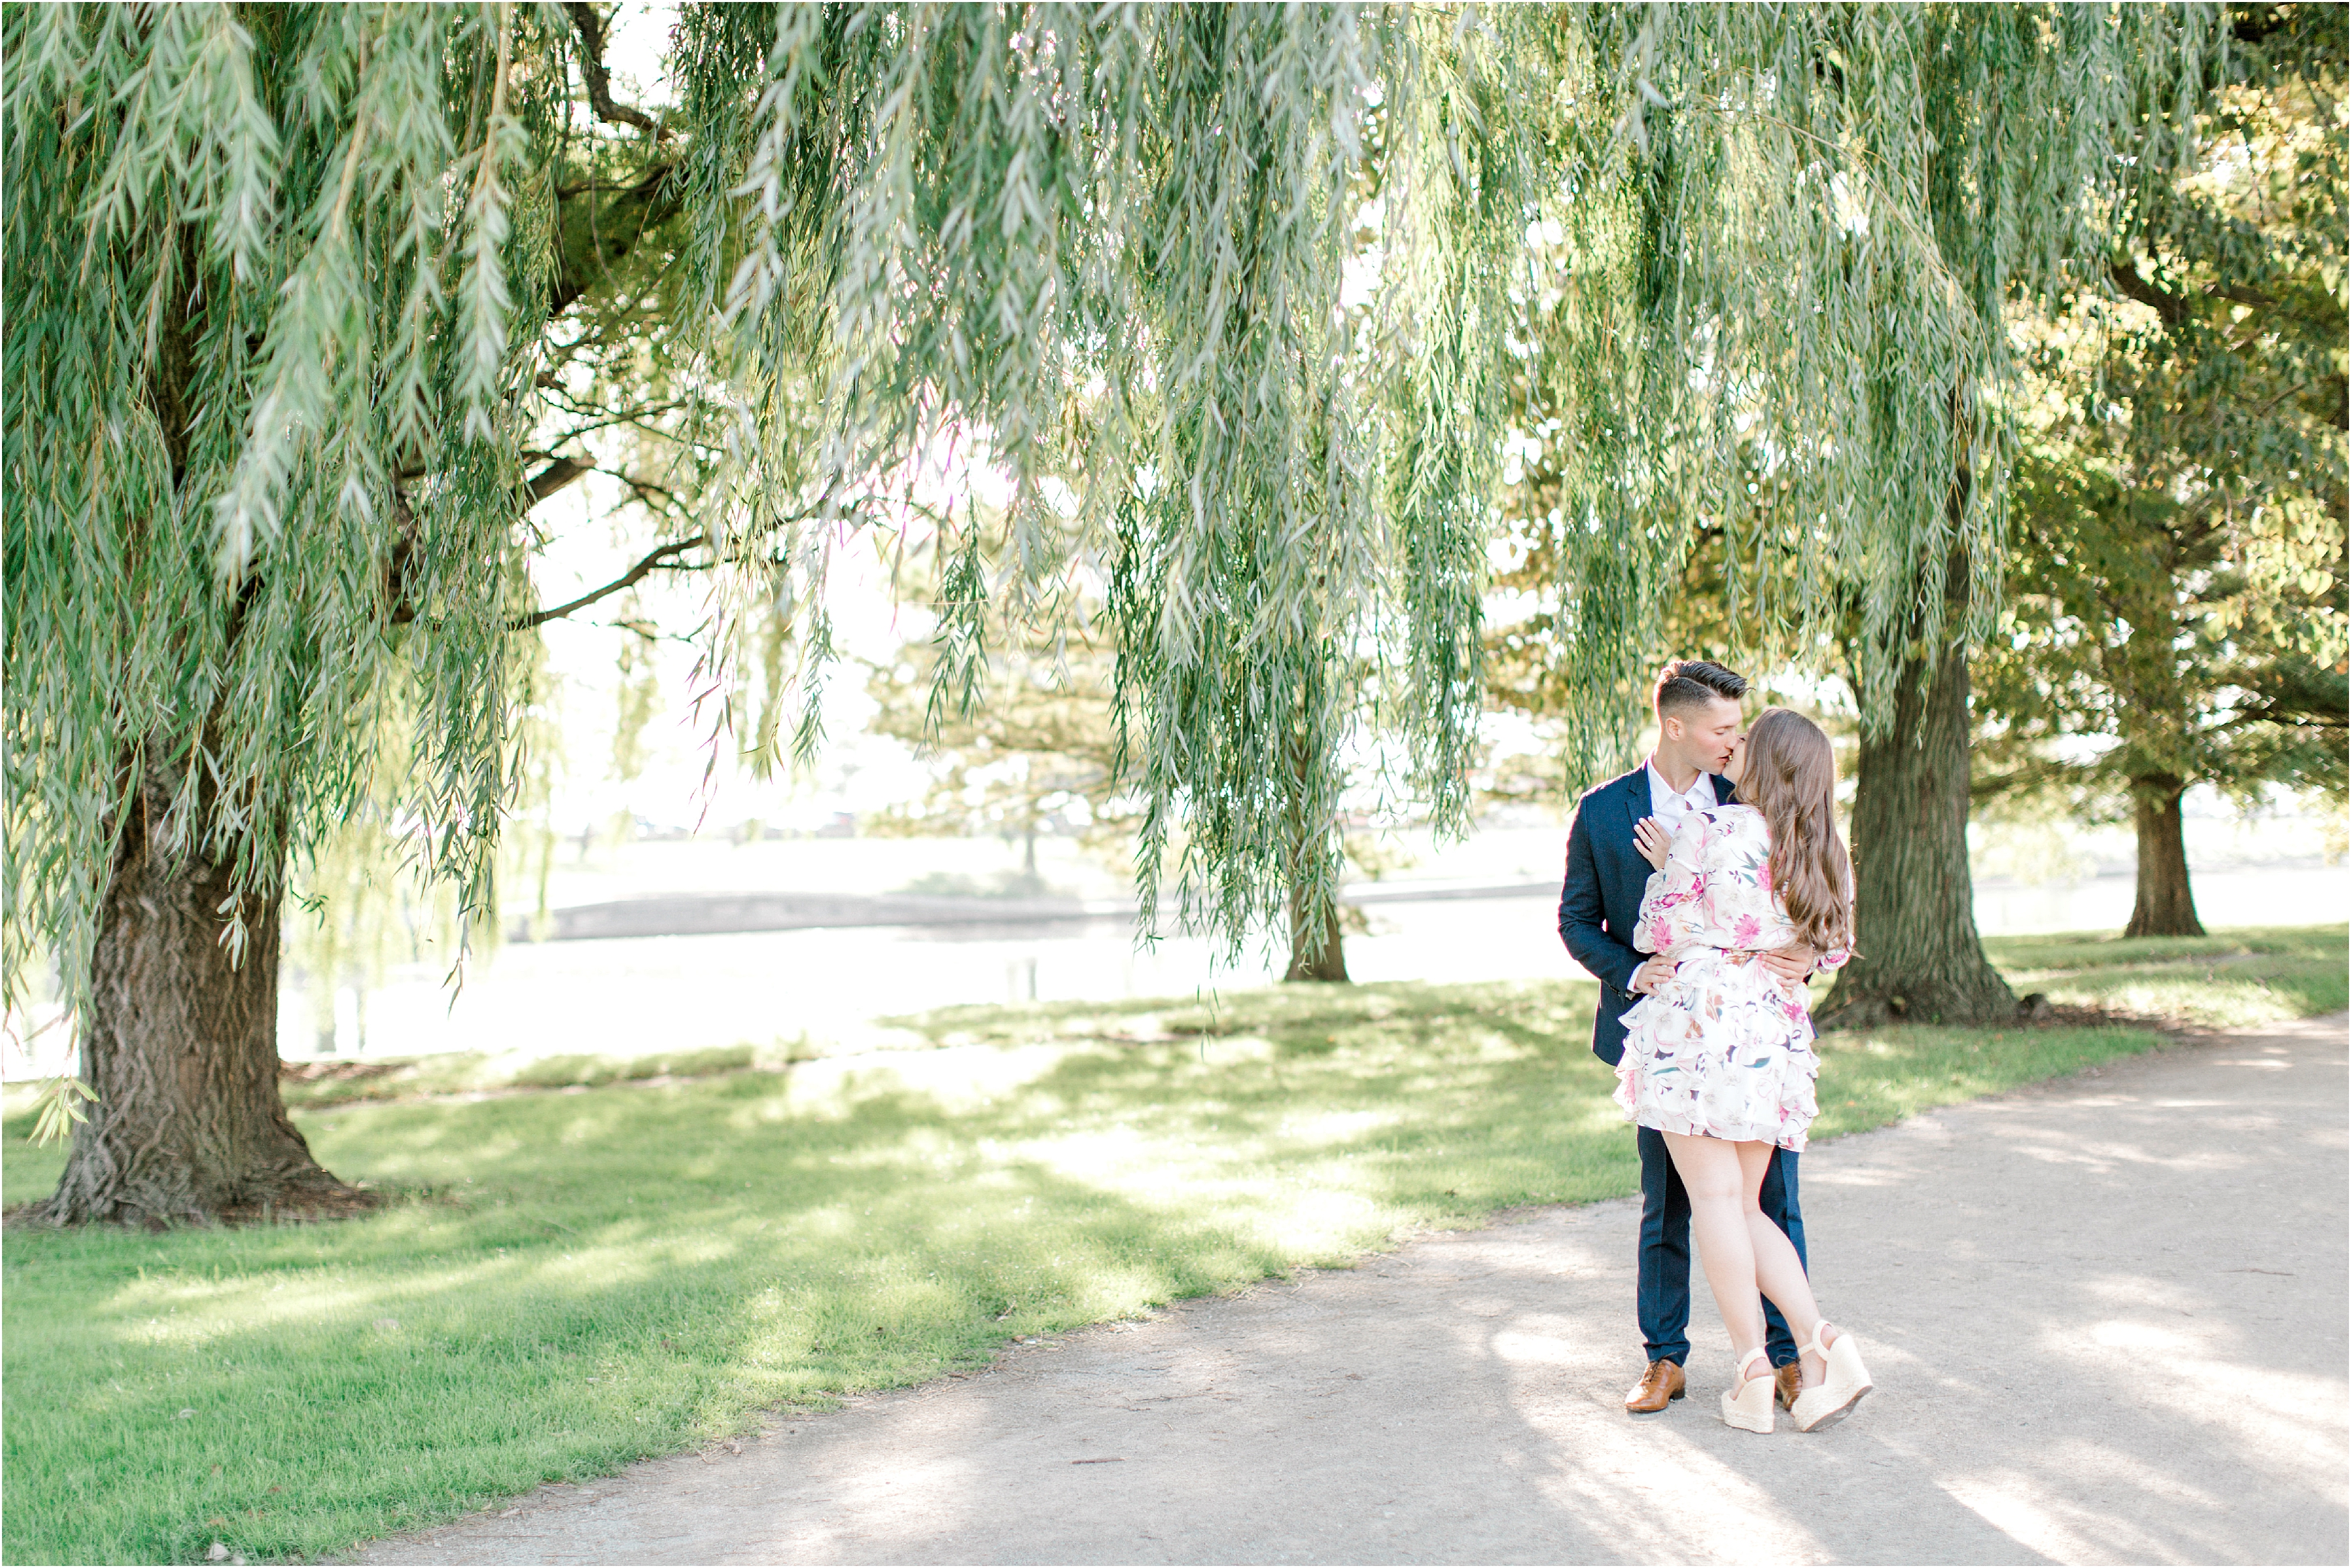 Lincoln park engagement session by Chicago wedding photographers Austin & Rachel Photography